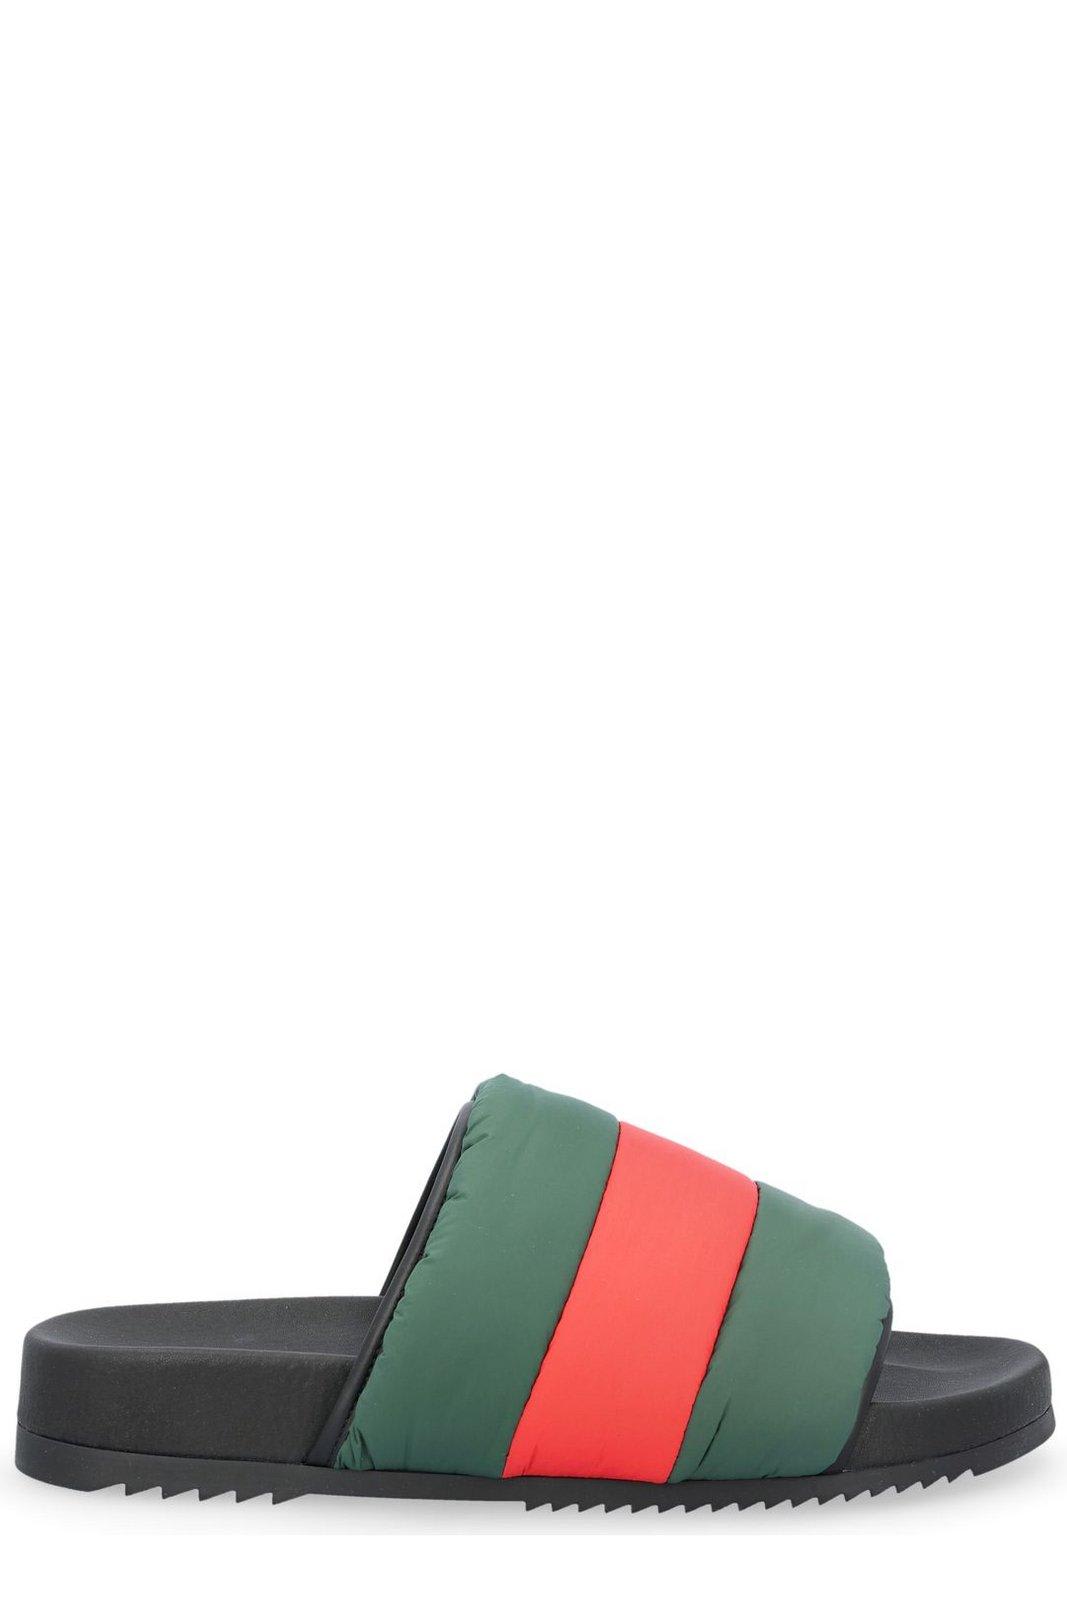 Gucci Padded Web Slide Sandals In Nero